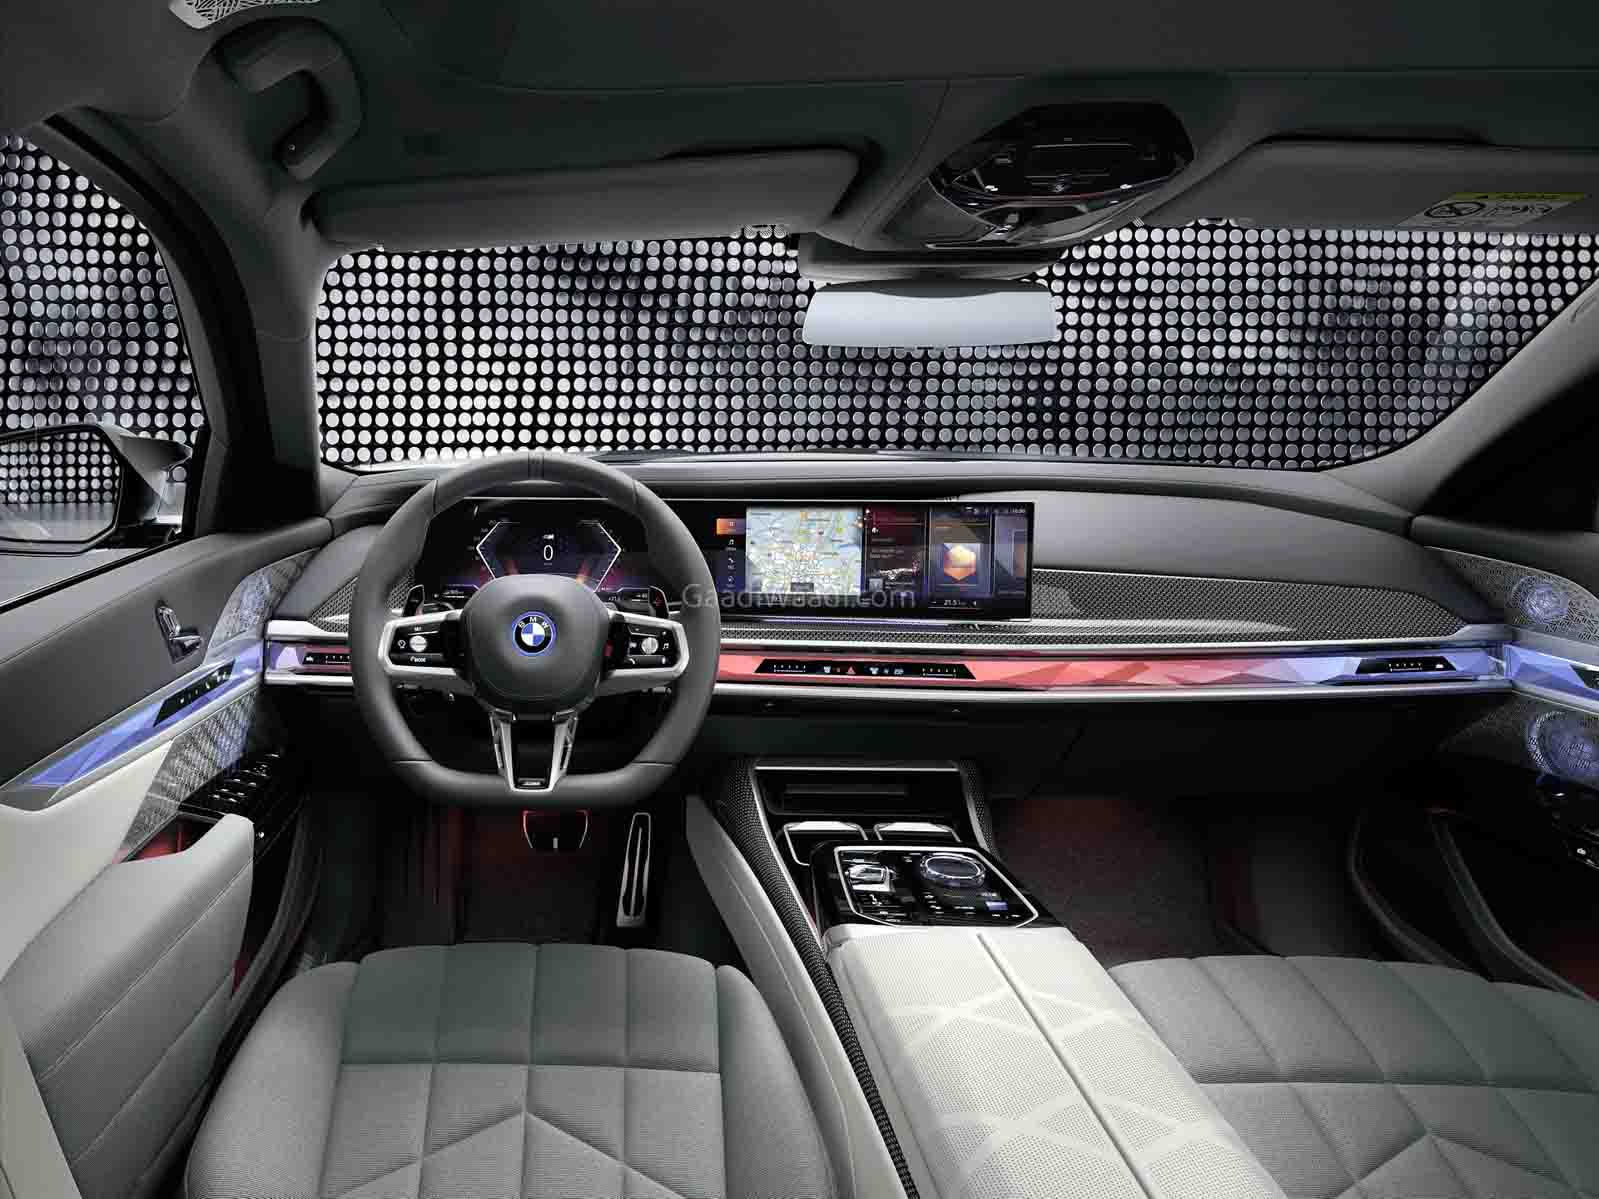 BMW X5 Interior  Awesome  YouTube